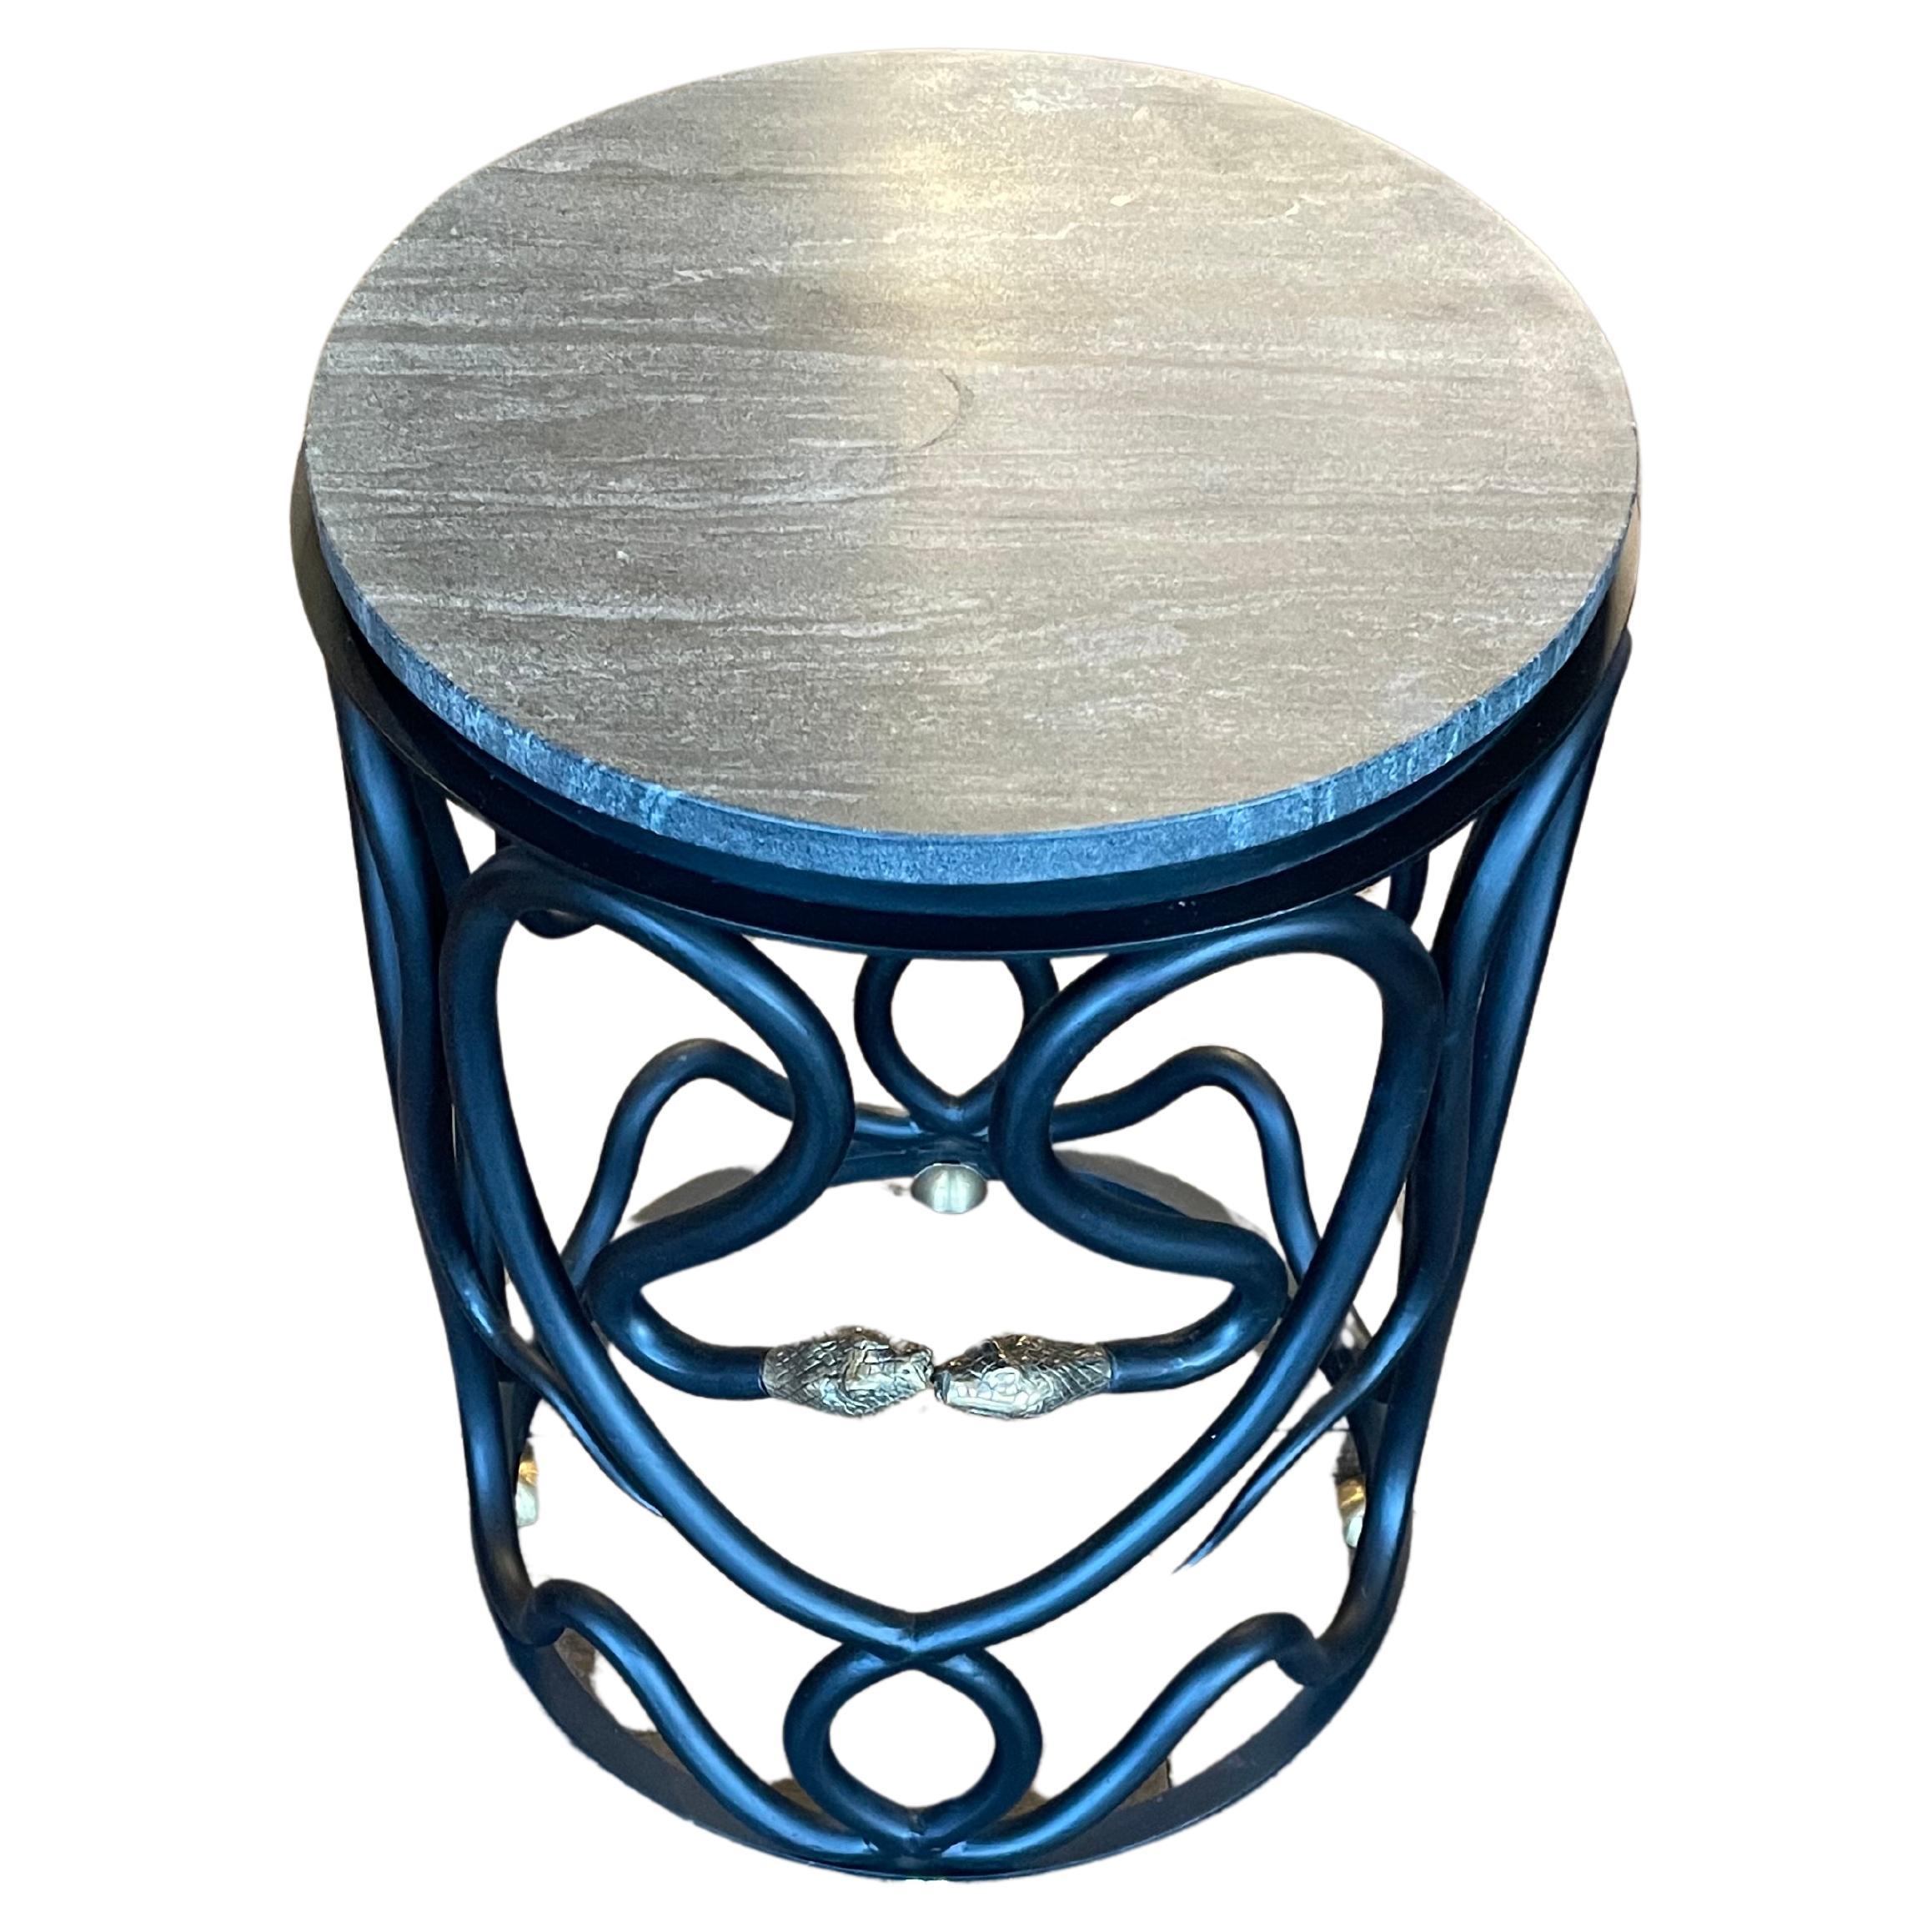 American Serpentine Cement-Top End Table by Paul Marra For Sale